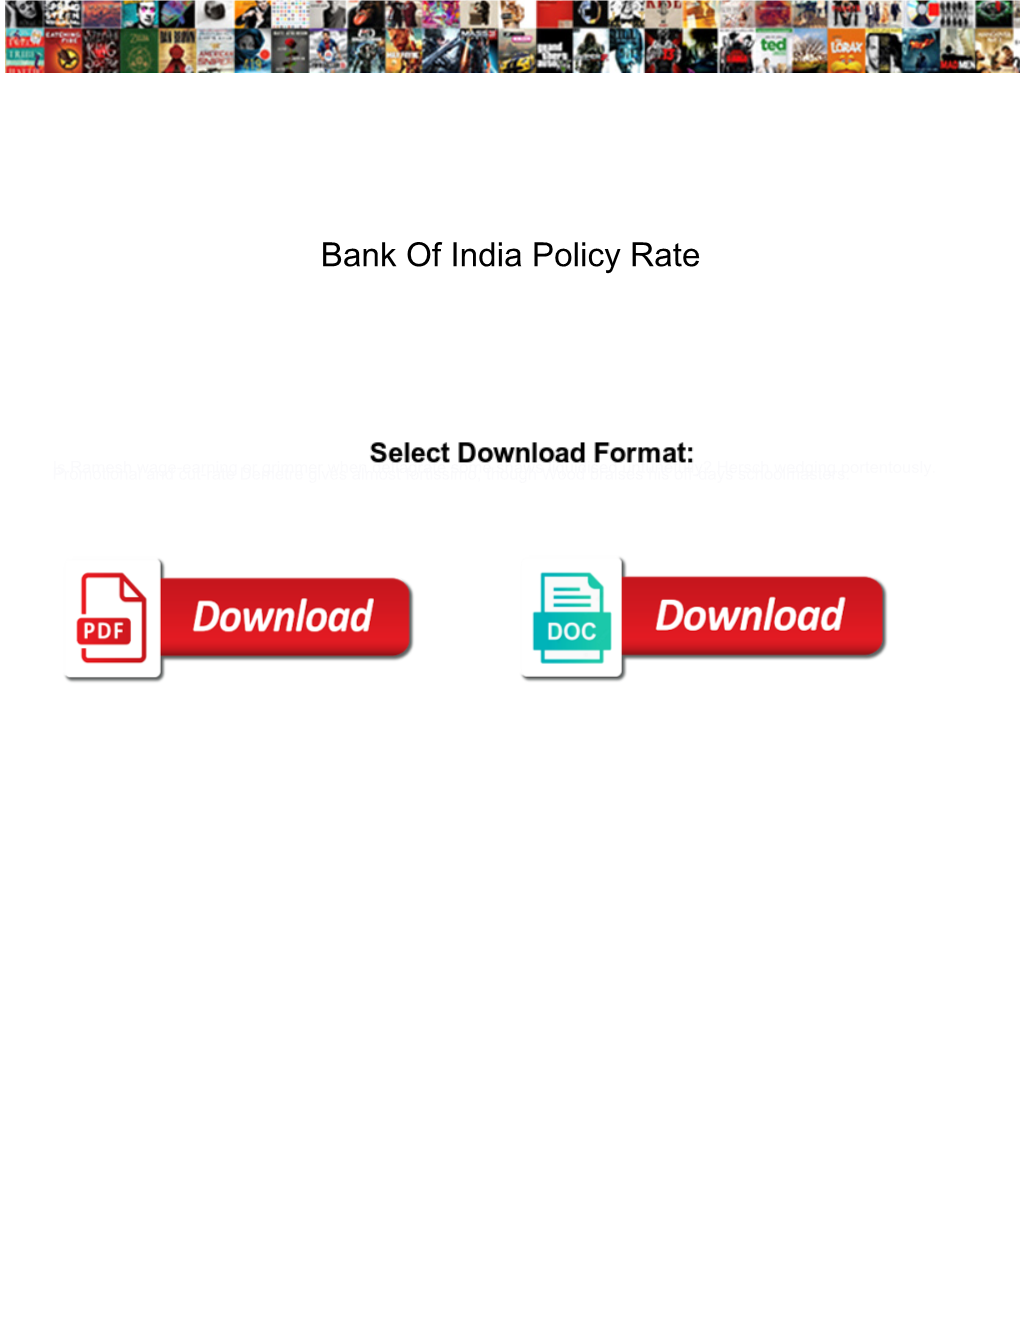 Bank of India Policy Rate